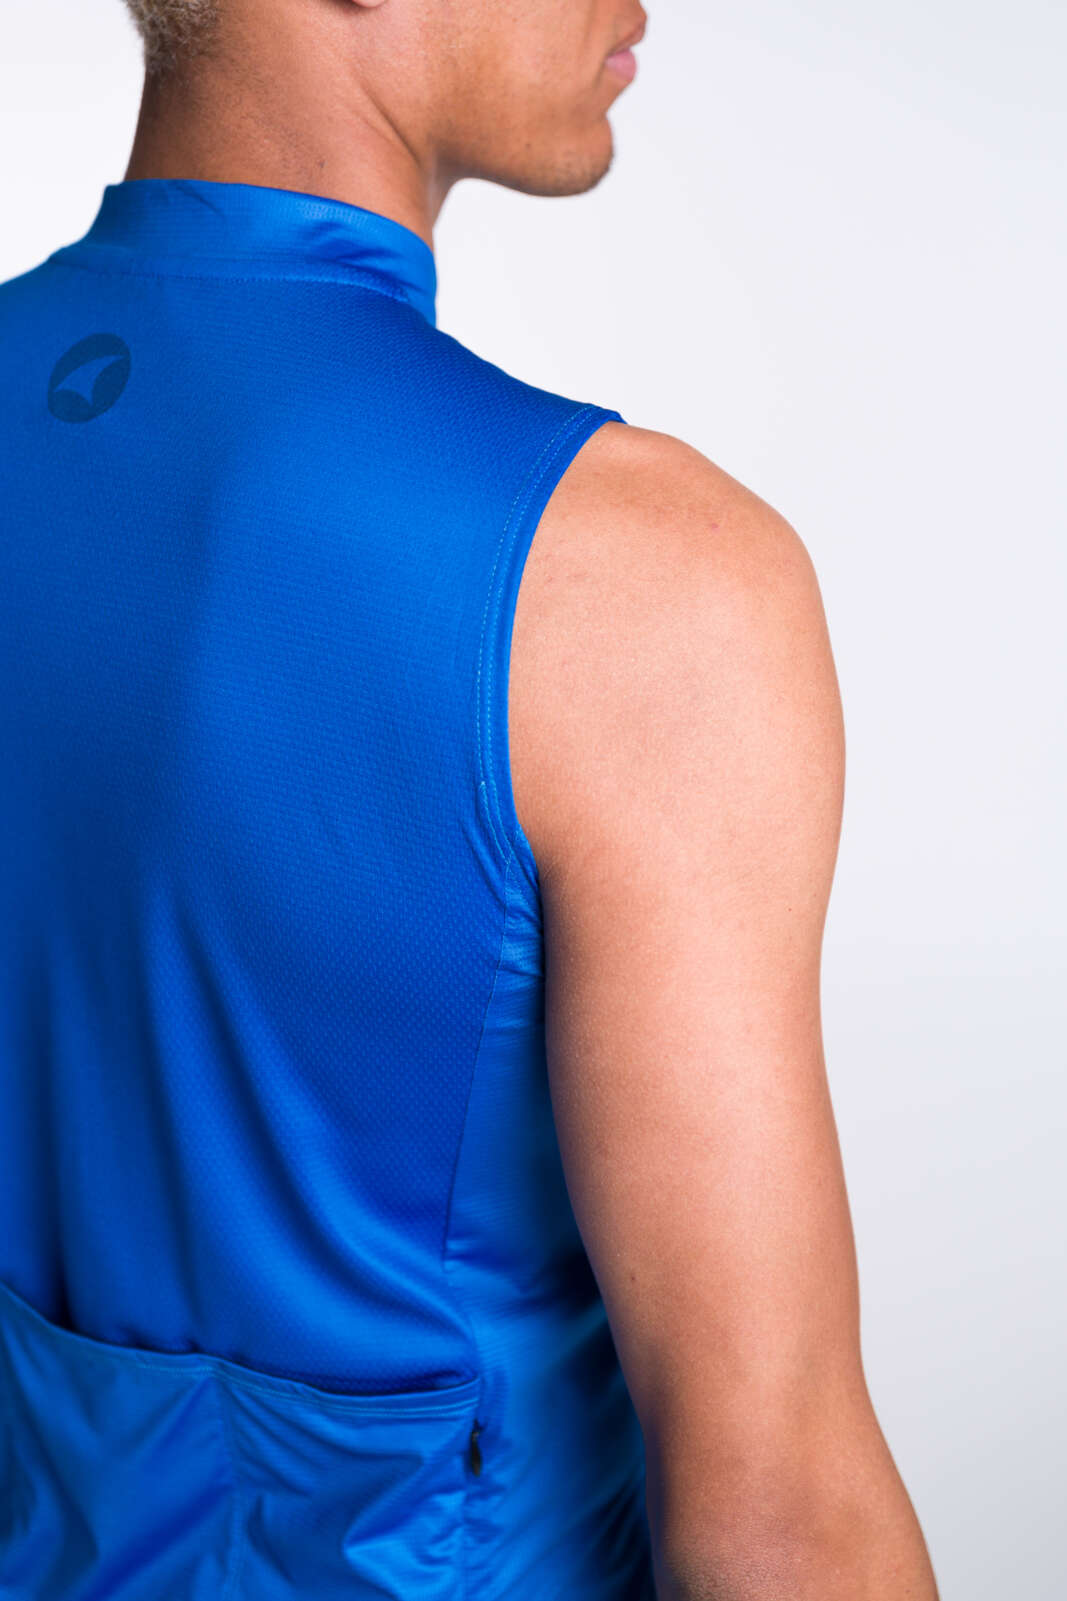 Men's Blue Sleeveless Cycling Jersey - Arm Openings